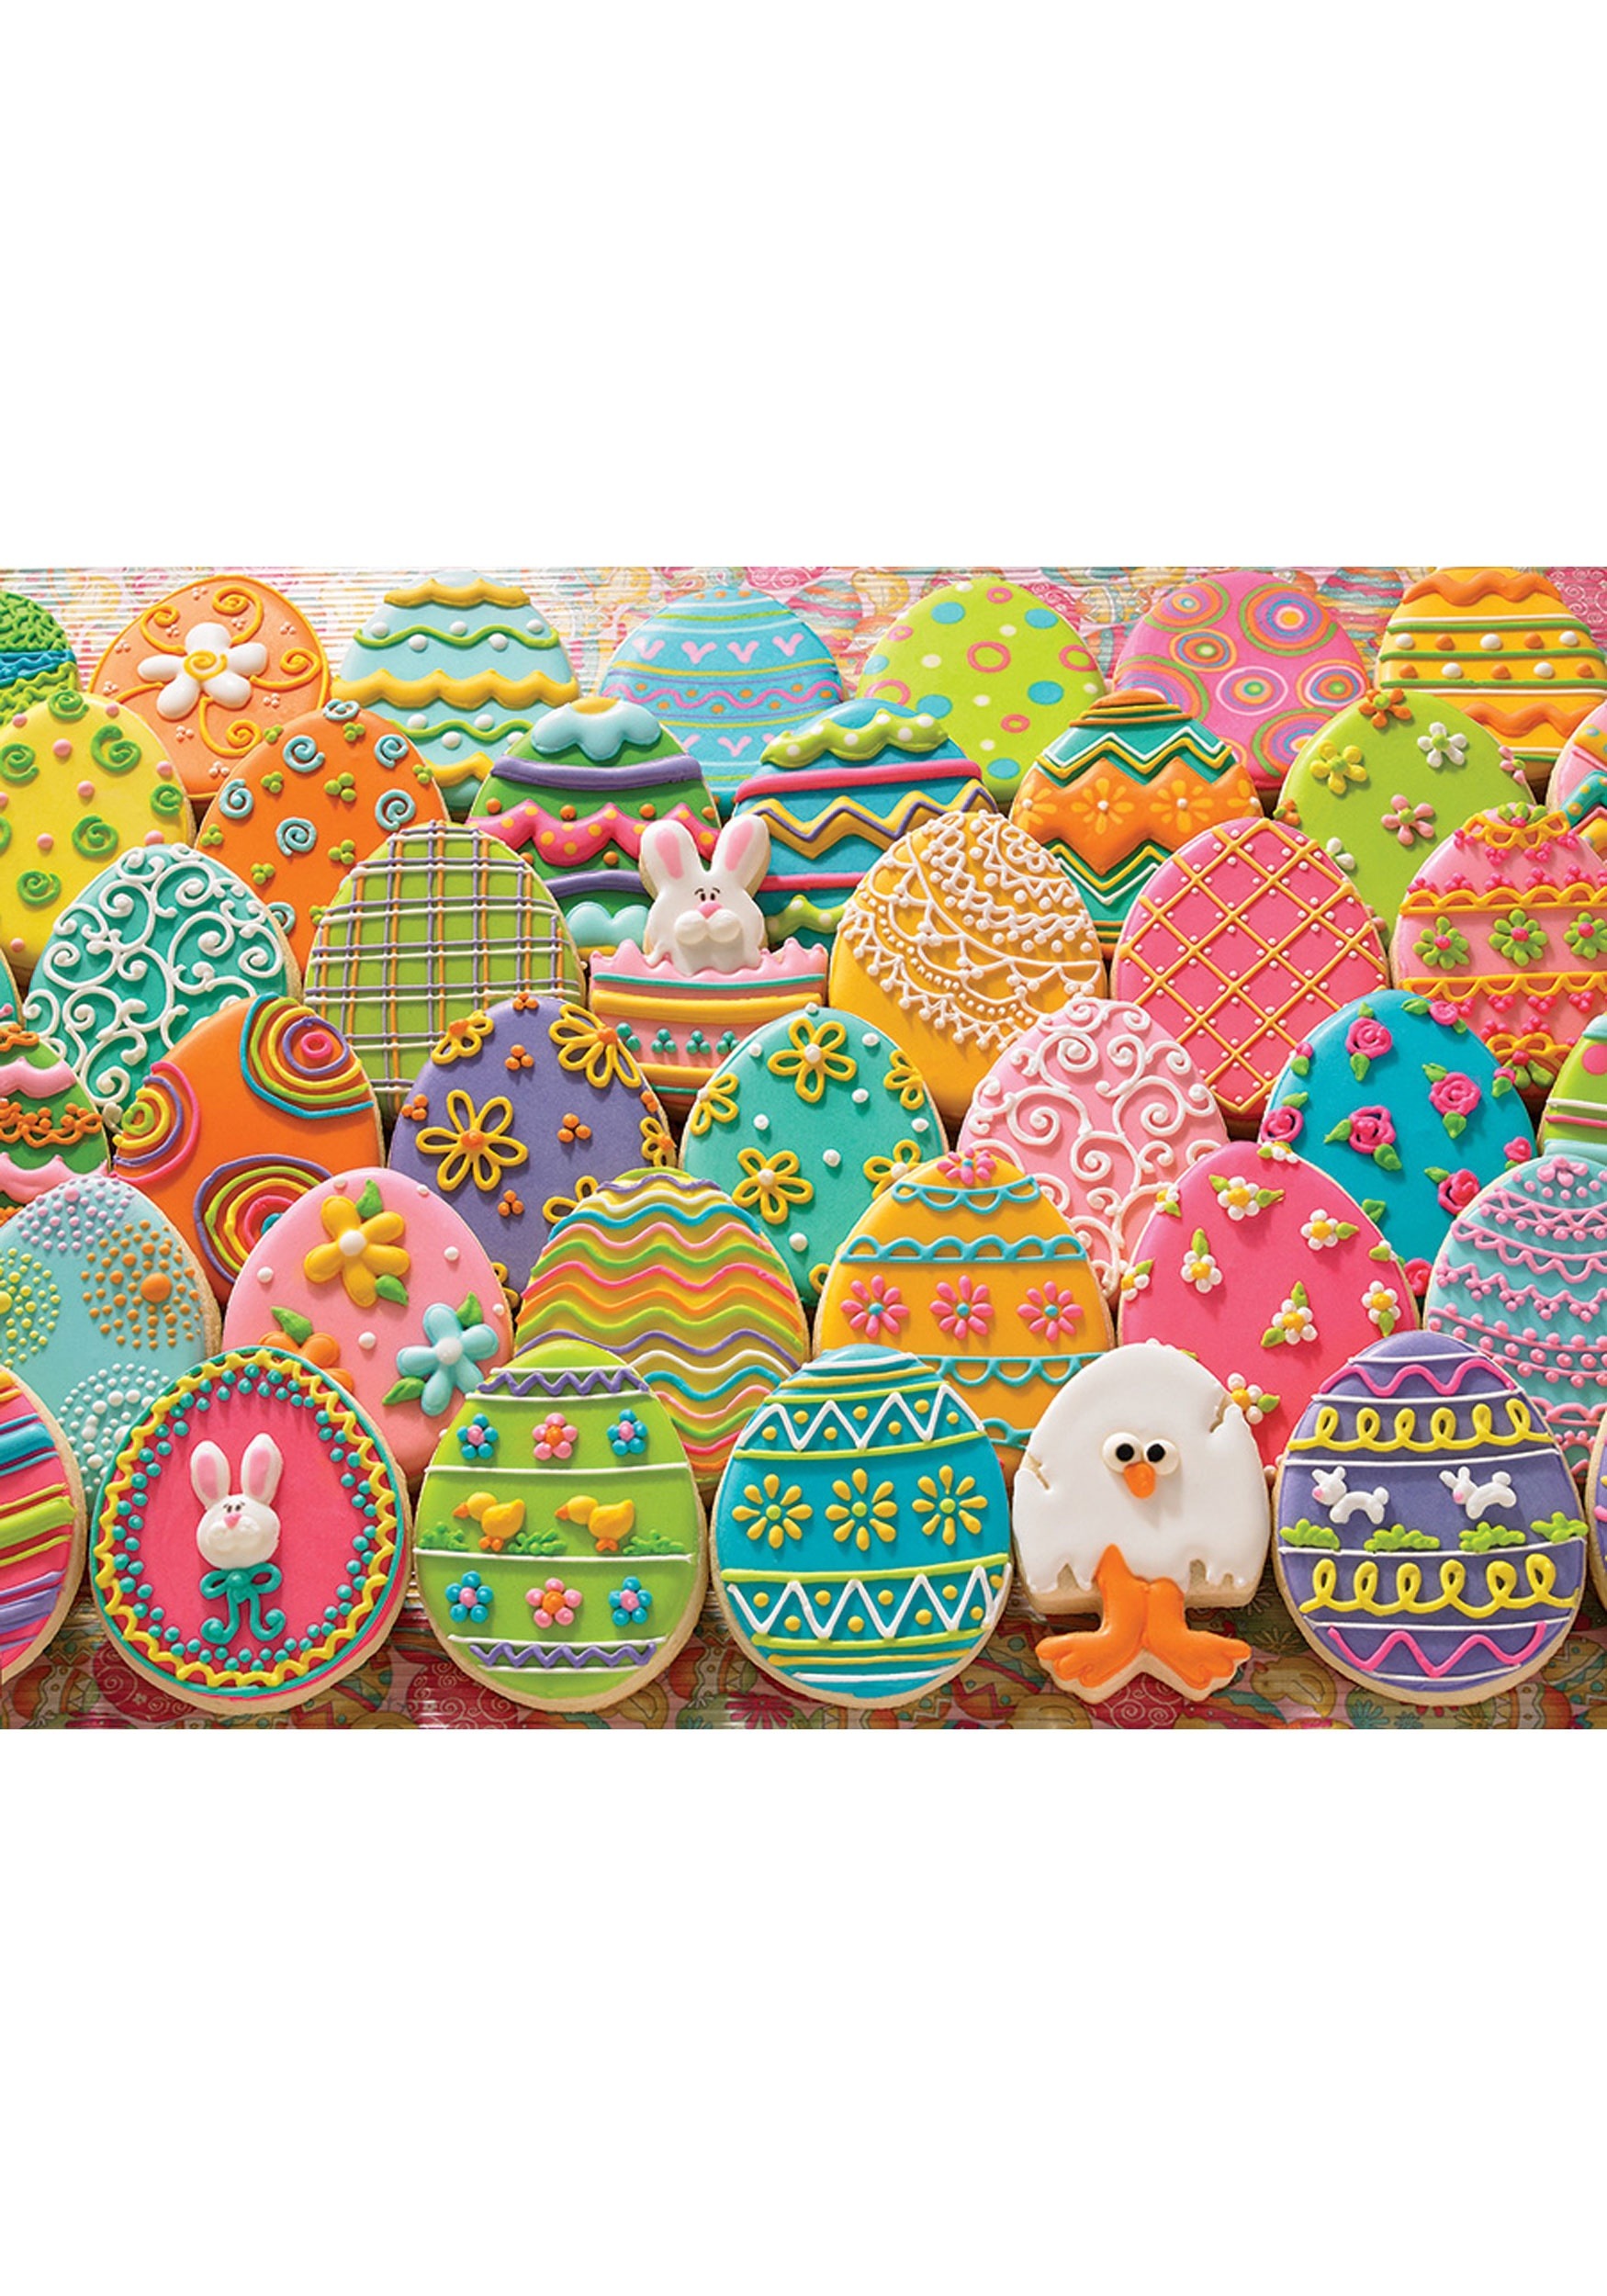 Cobble Hill Easter Egg Cookies 350 Family Pieces Puzzle